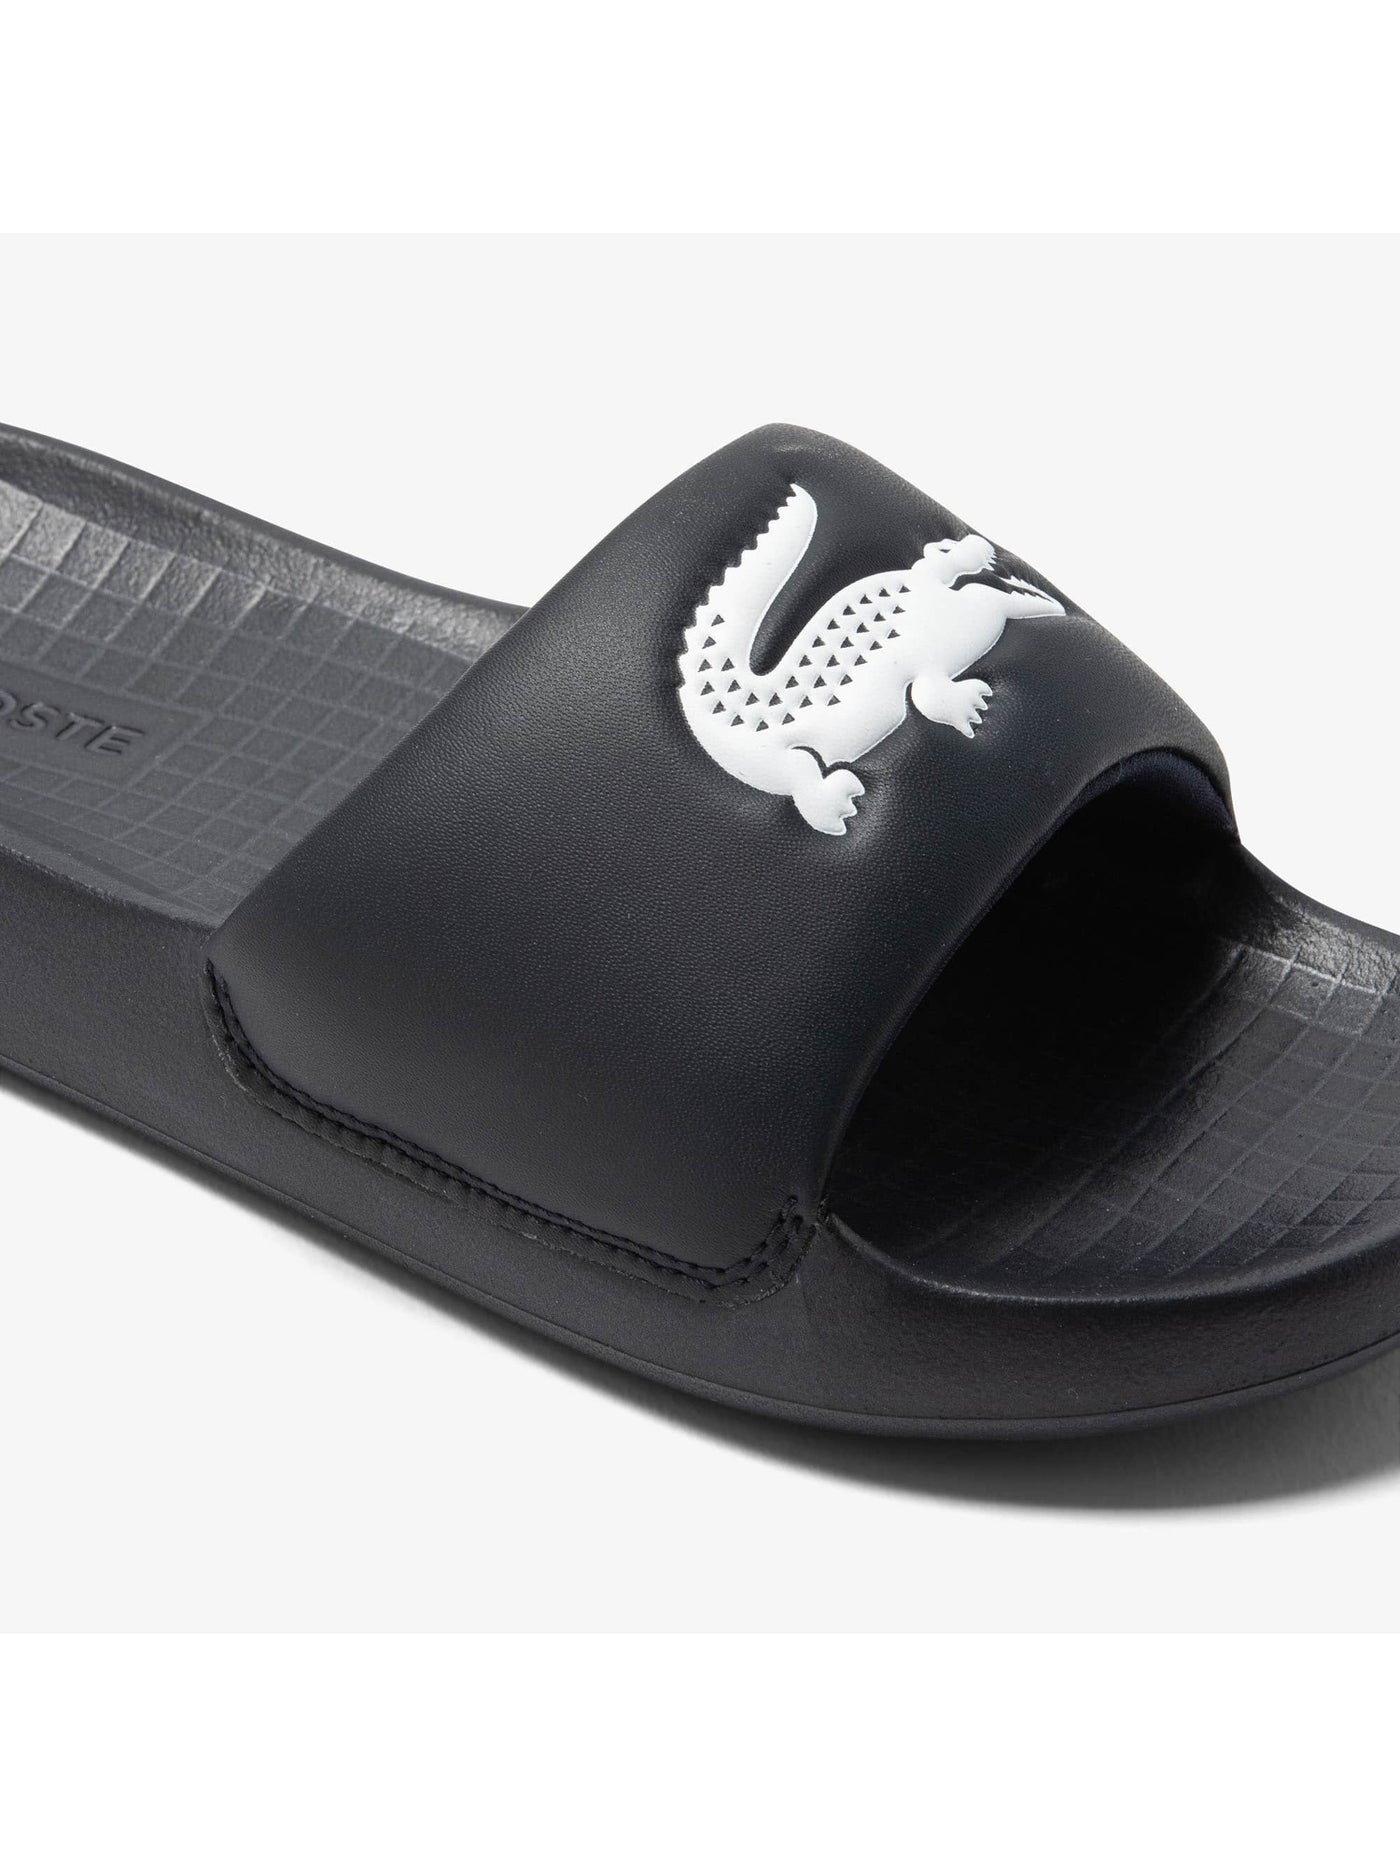 LACOSTE Mens Black Cushioned Croco 2.0 Open Toe Slip On Slide Sandals Shoes